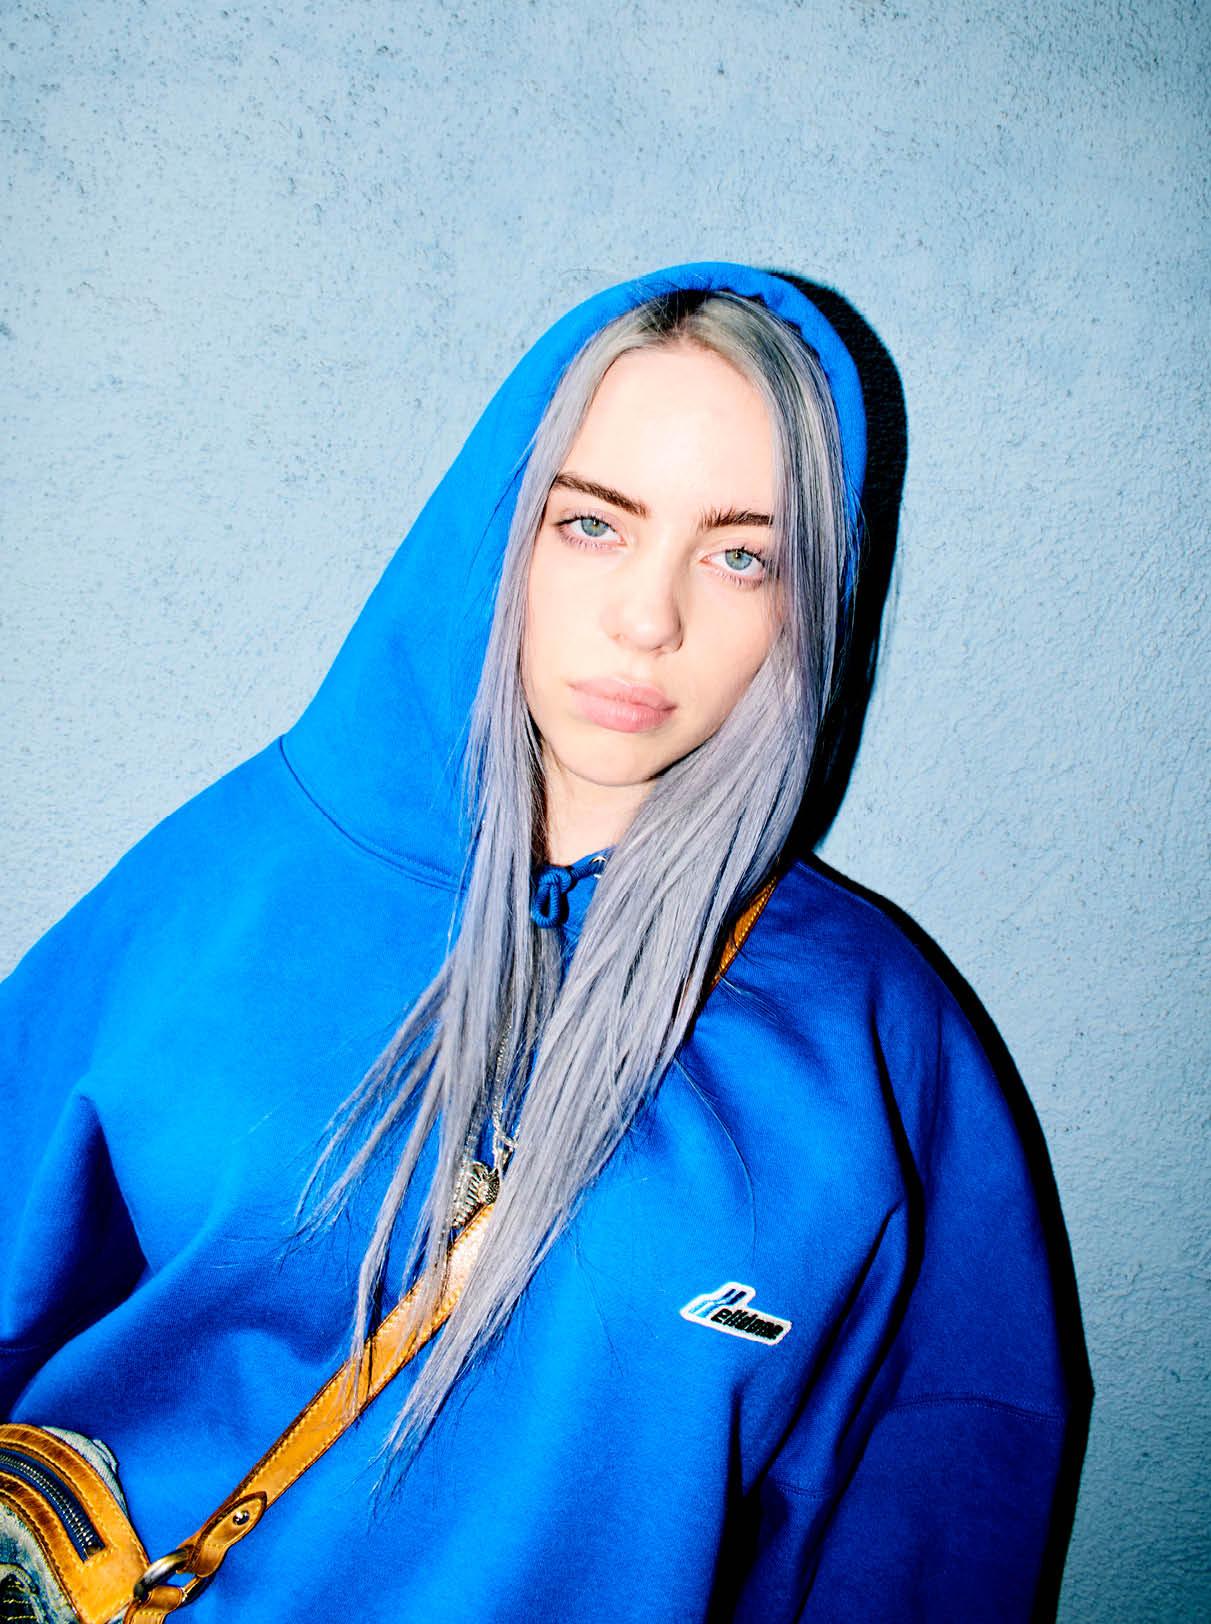 Don't Wanna Be You: Billie Eilish Interviewed. Features. Clash